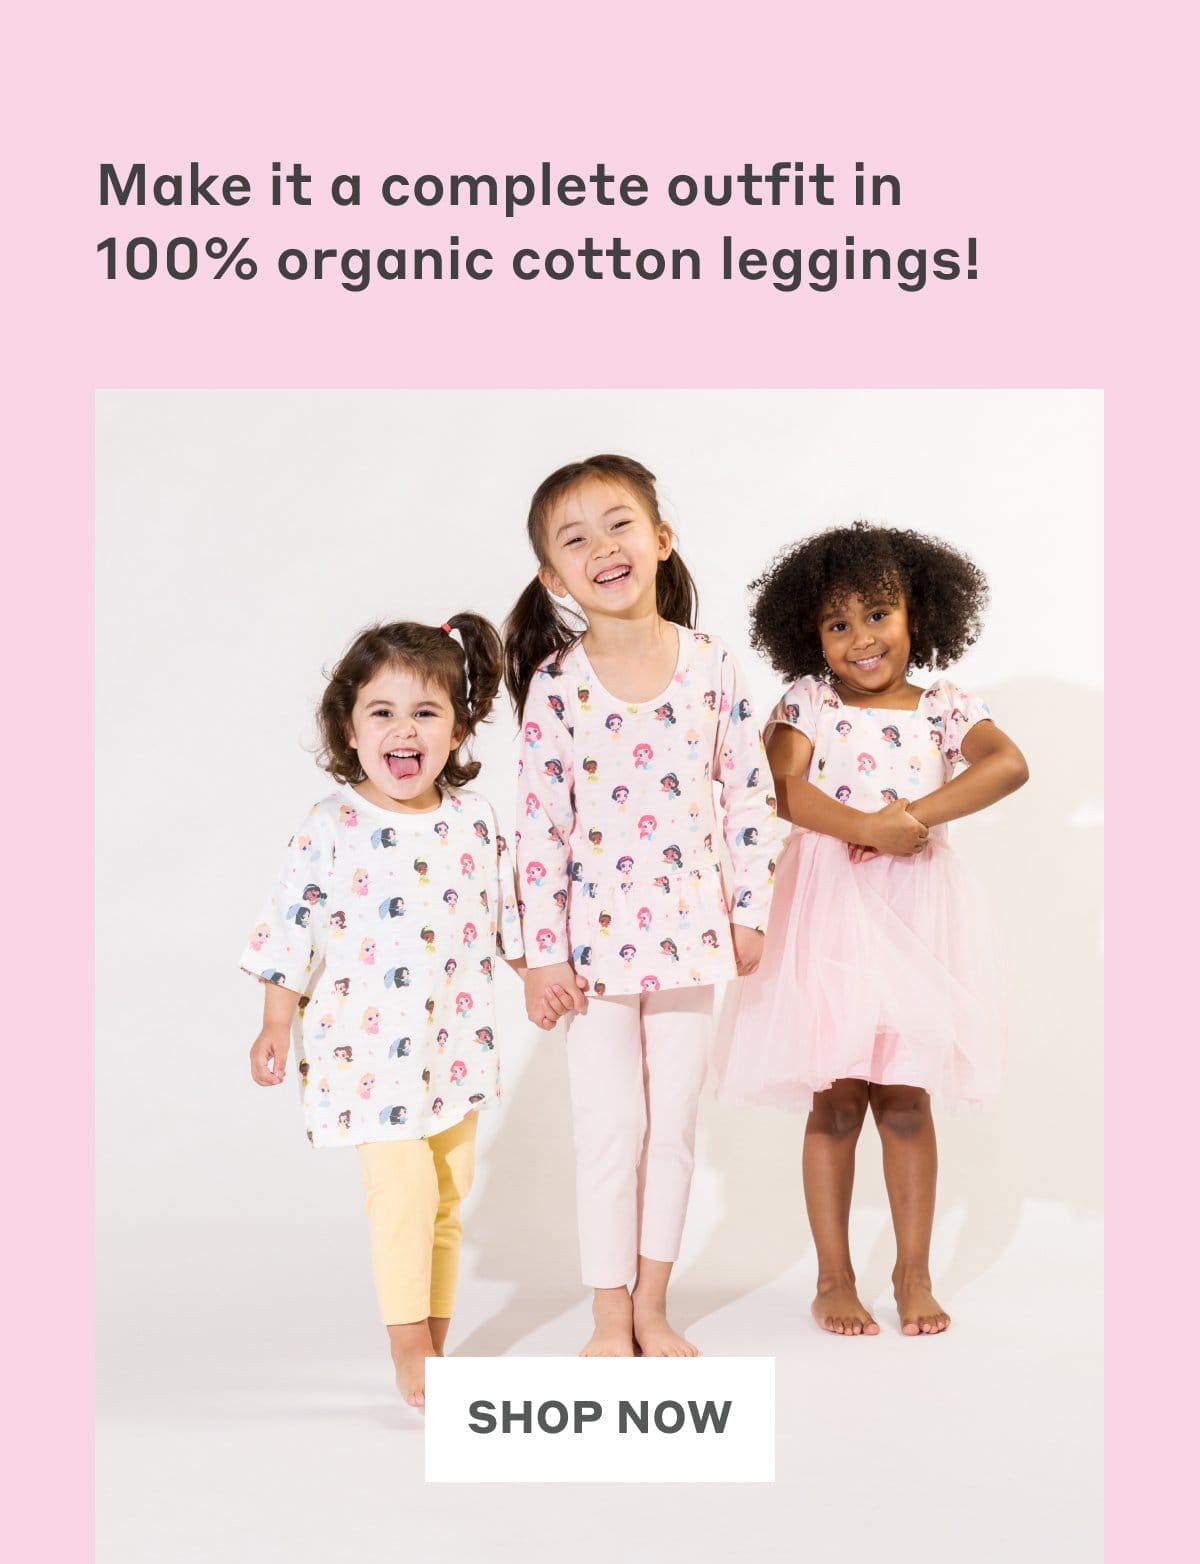 Make it a complete outfit in 100% organic cotton leggings!